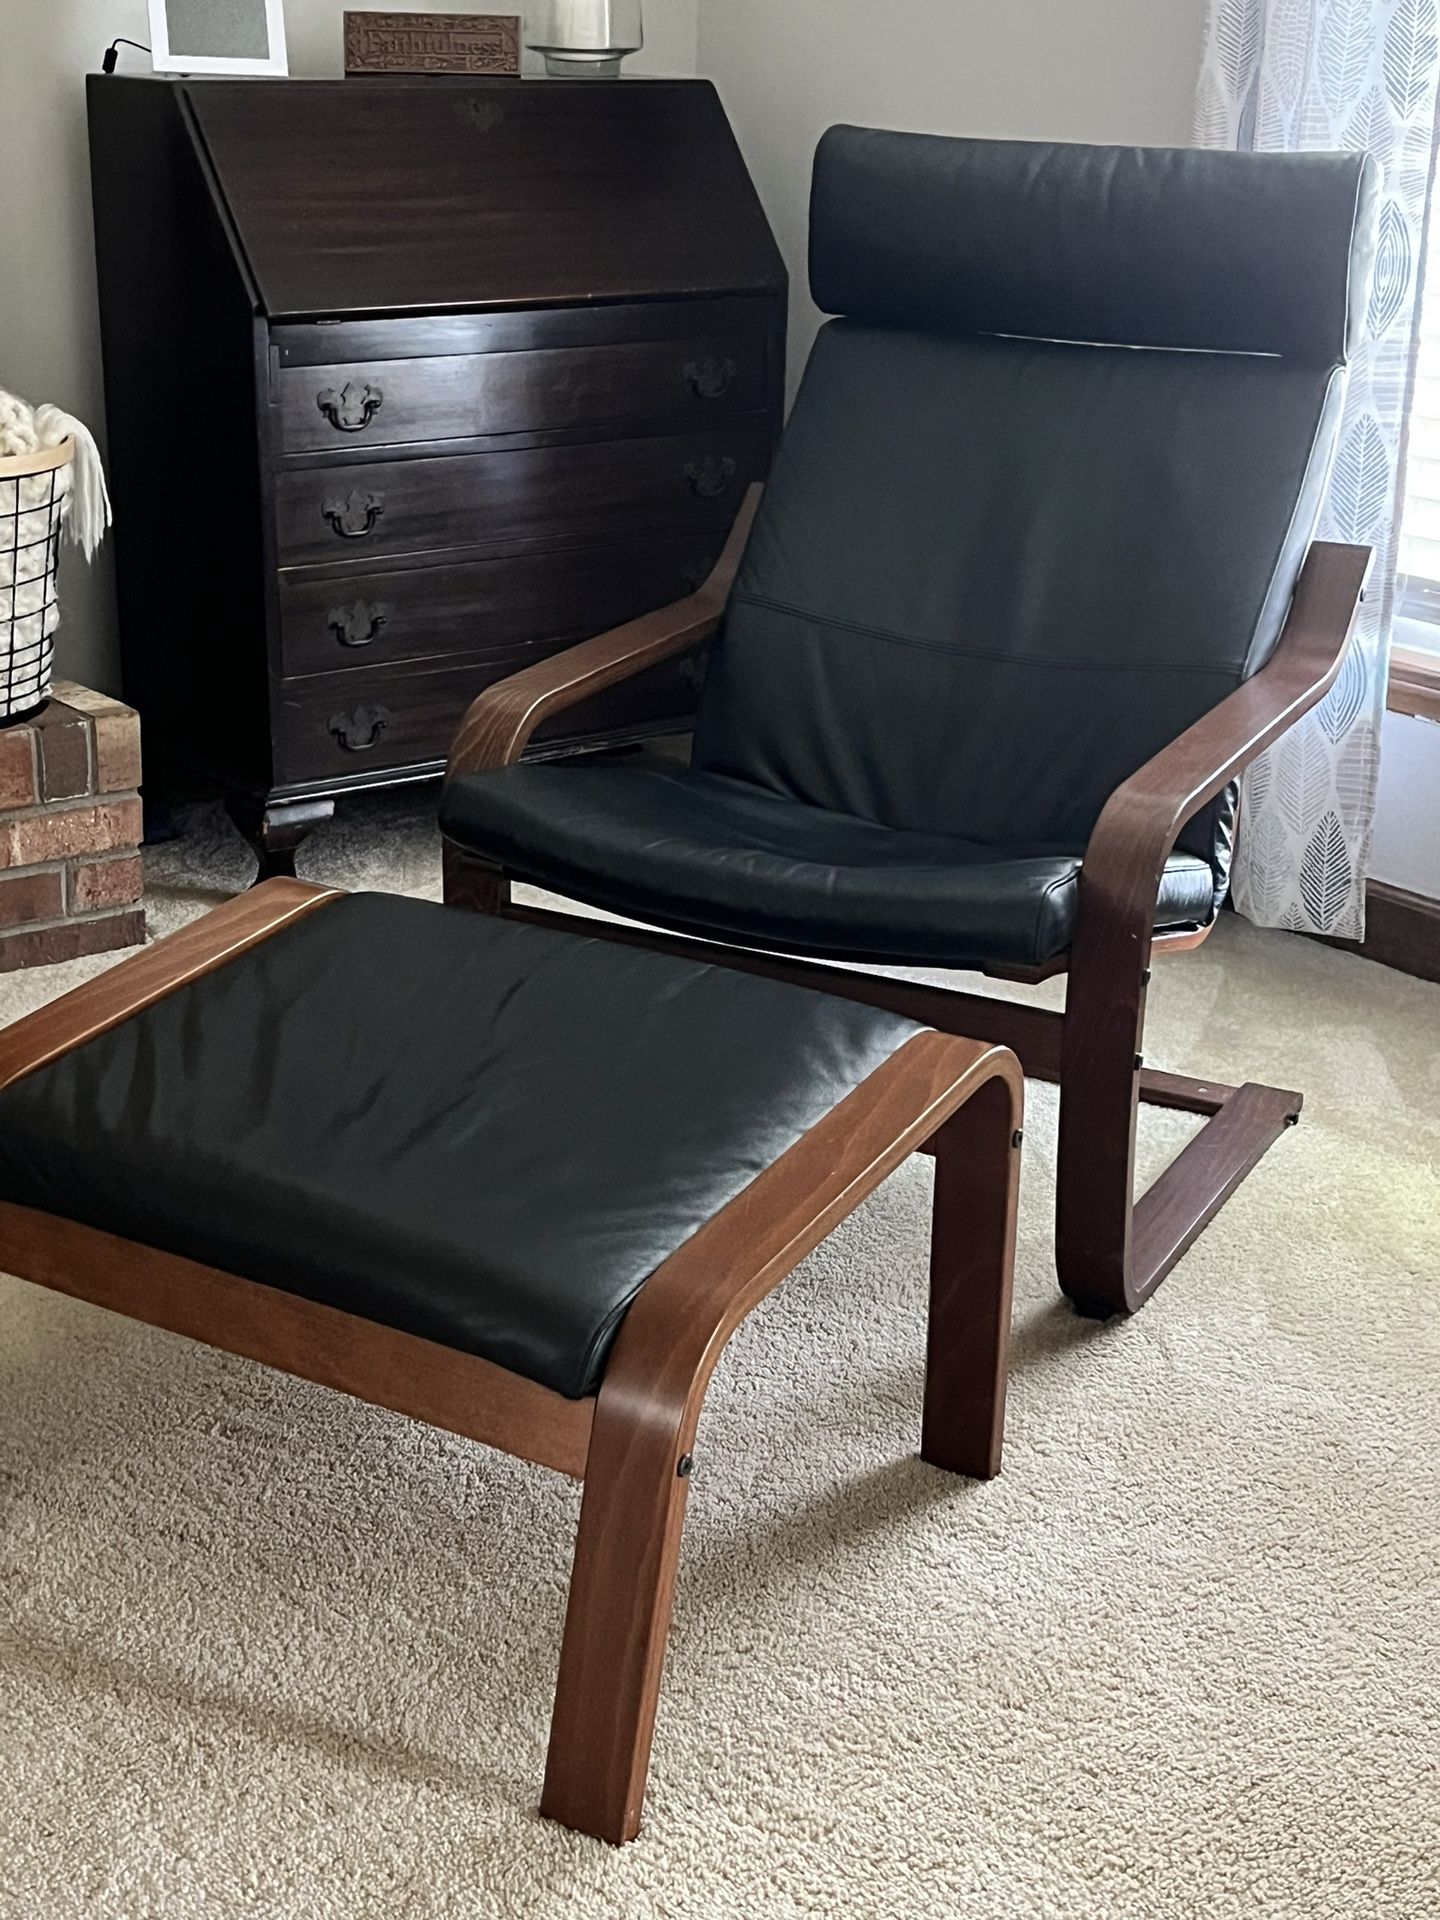 Leather IKEA Poang Chair + Ottoman